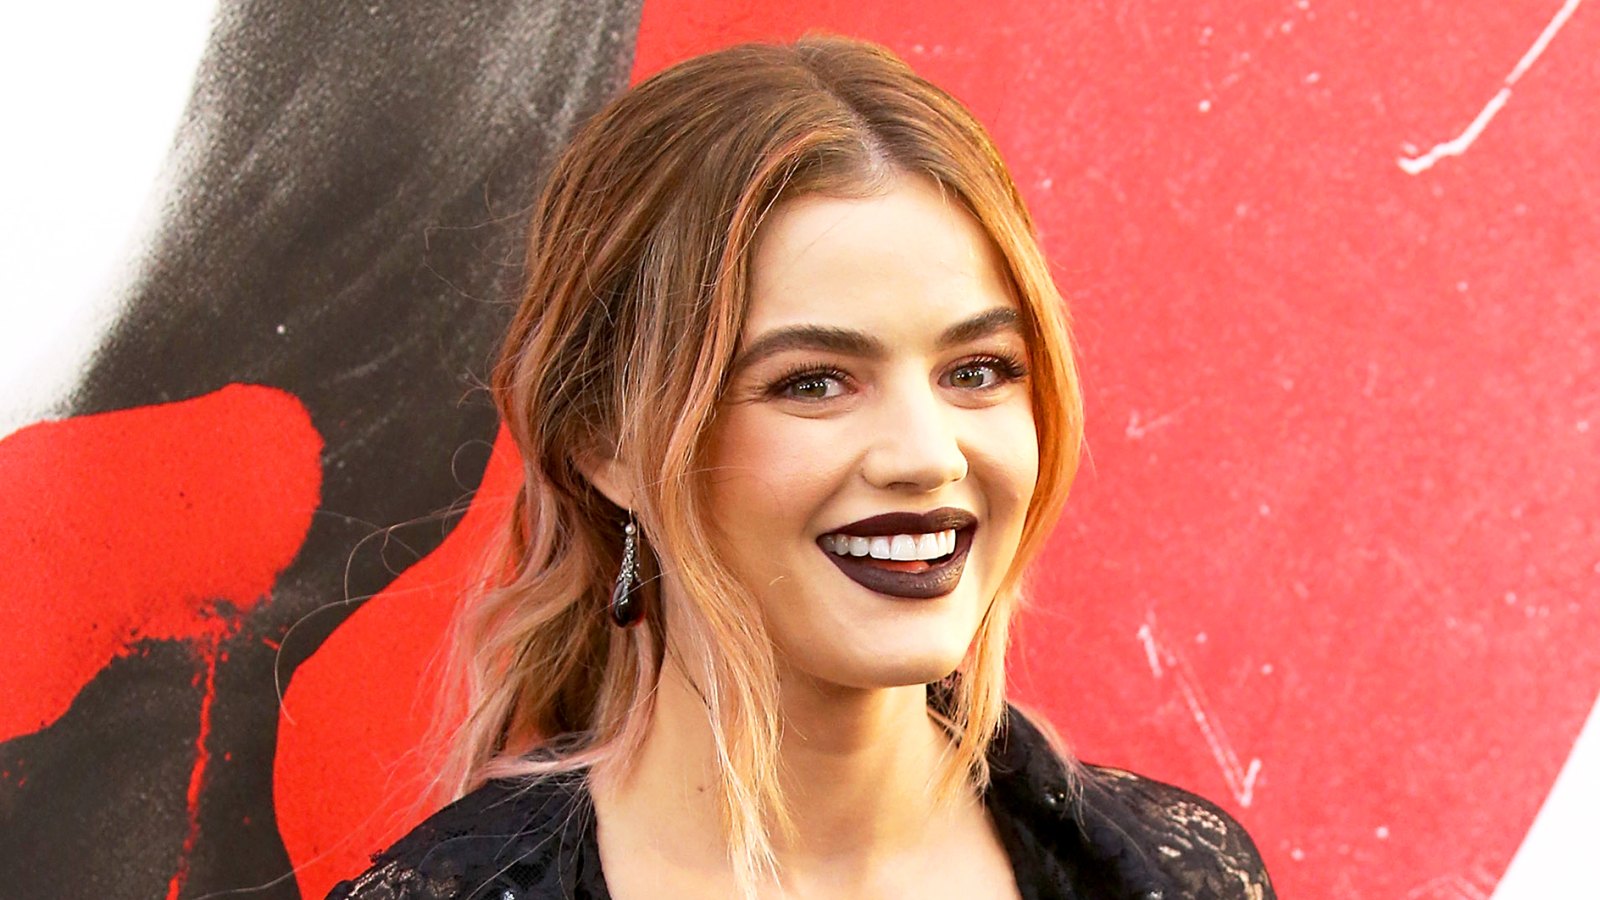 Lucy Hale arrives to the Los Angeles Premiere of Universal Pictures' "Blumhouse's Truth Or Dare" held at ArcLight Cinemas on April 12, 2018 in Hollywood, California.